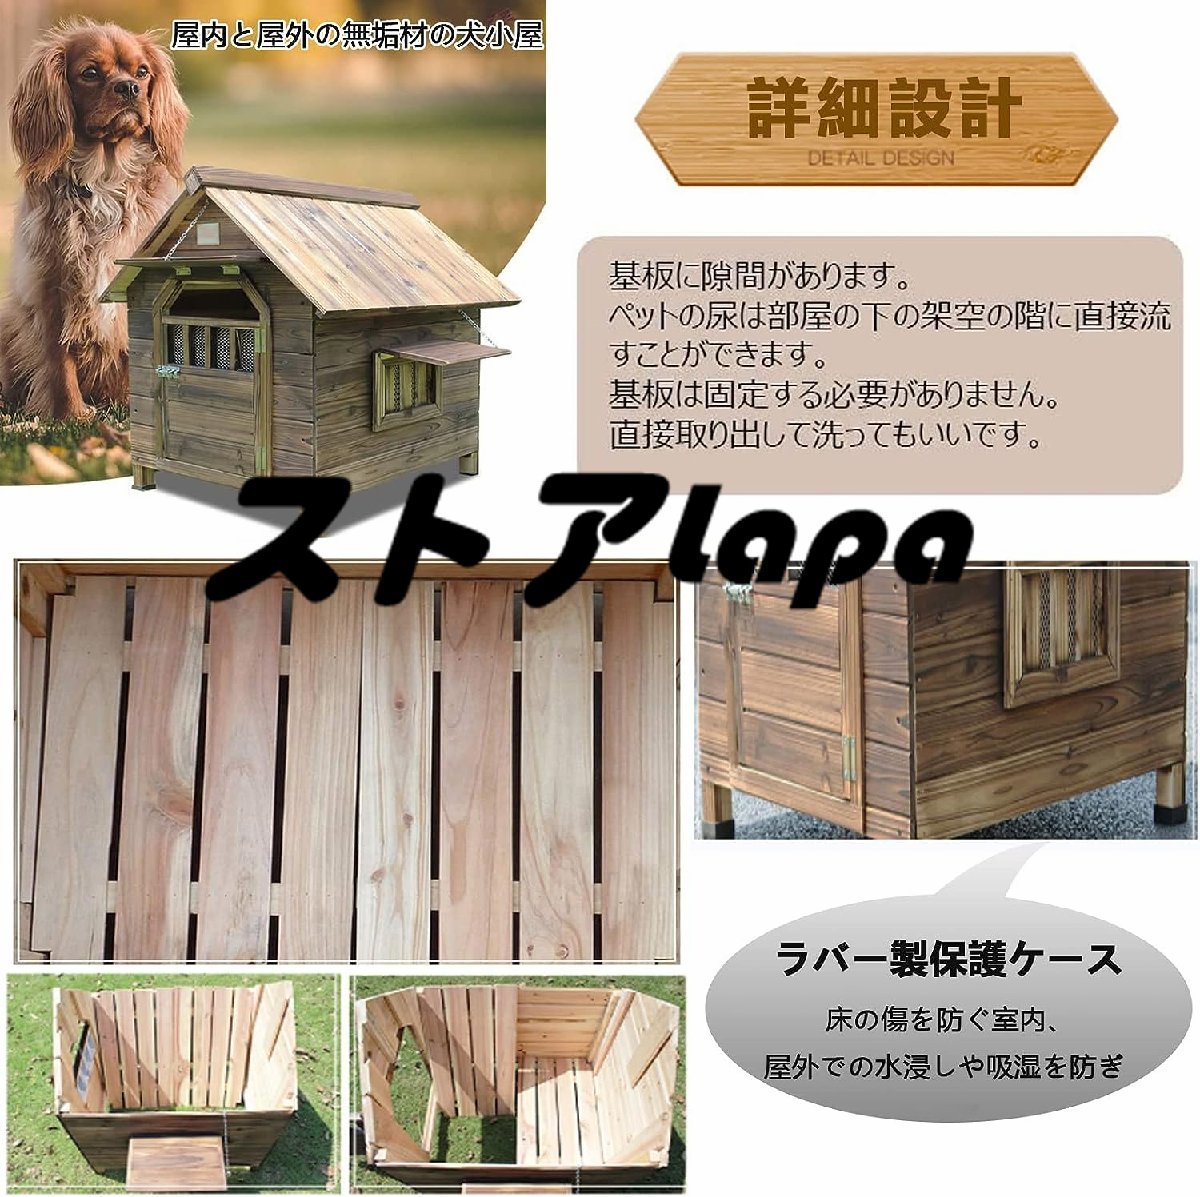  strongly recommendation kennel large dog roof door attaching enduring charcoal acid .. corrosion . warm all weather type sunburn measures . manner rain guard construction easy ventilation stable . durability L938